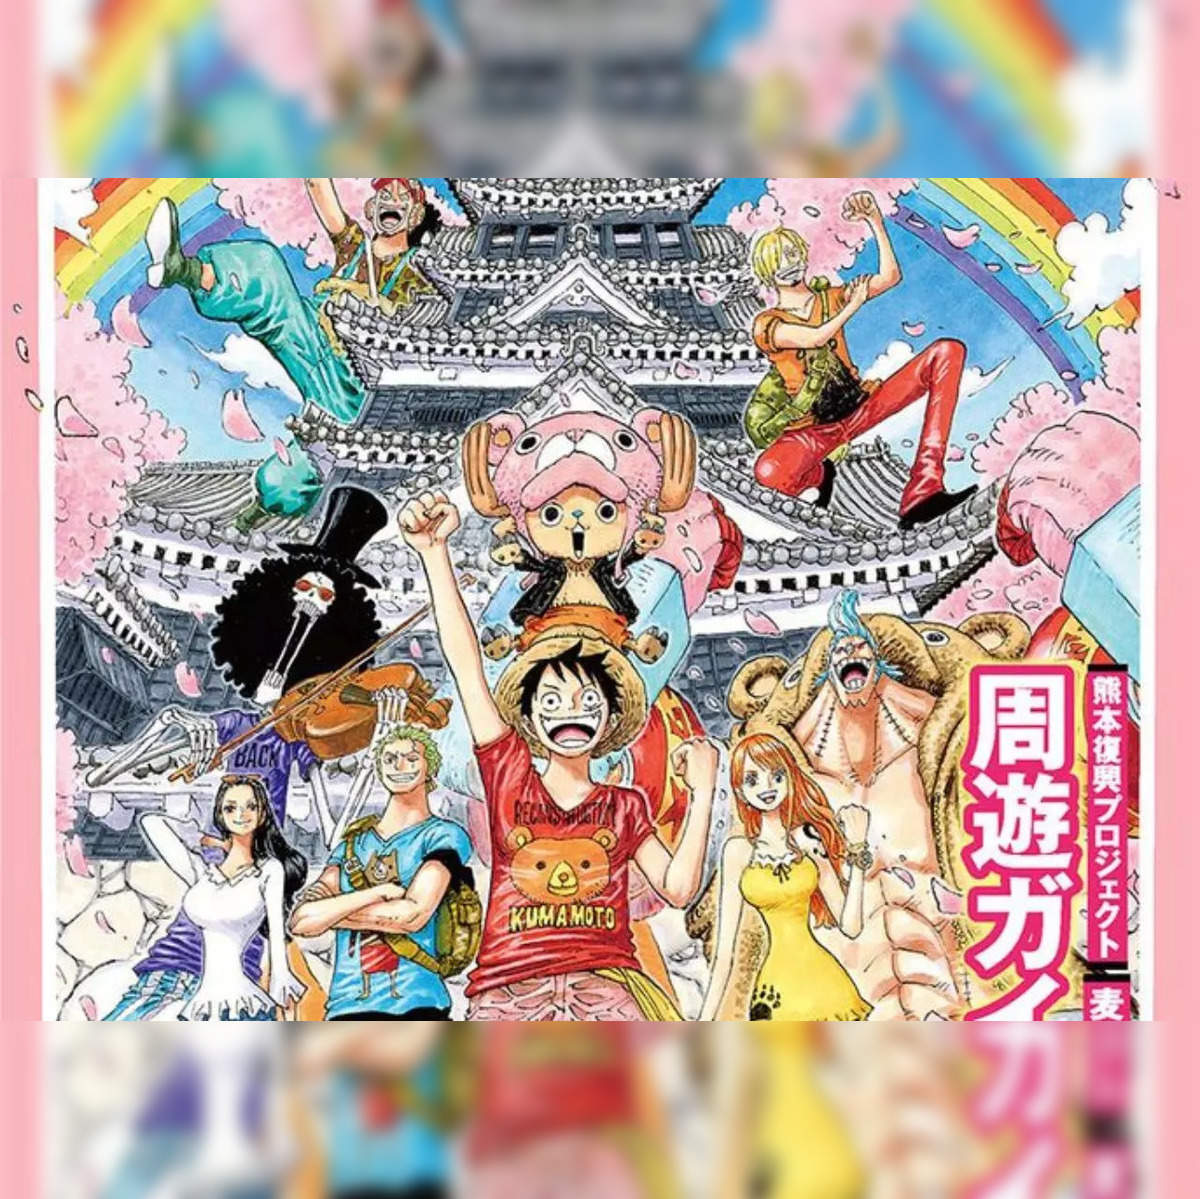 one piece chapter 1114: One Piece Chapter 1114 release date: Is 